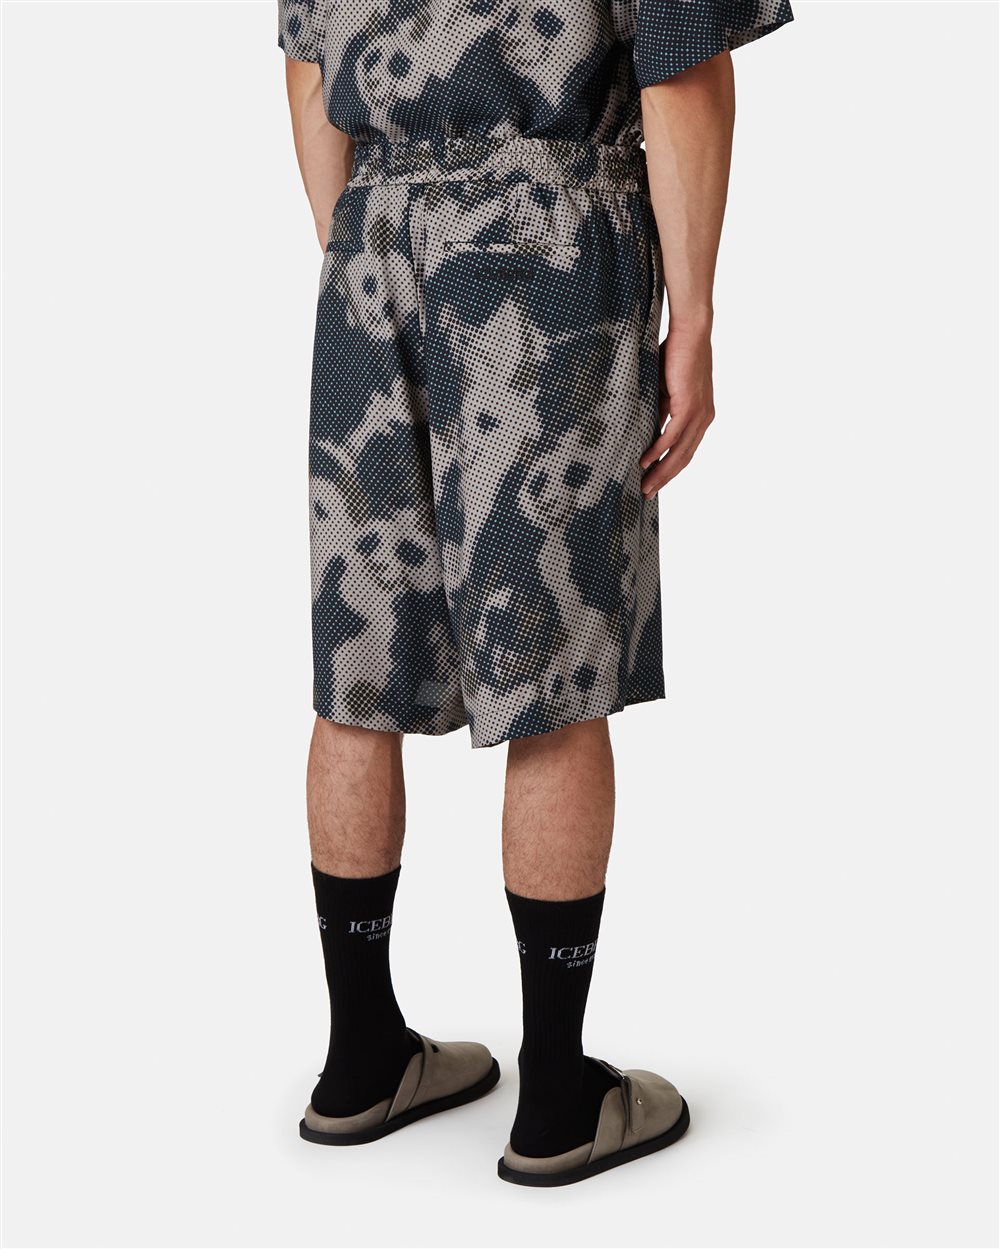 Bermuda shorts with pixel print and logo - Iceberg - Official Website